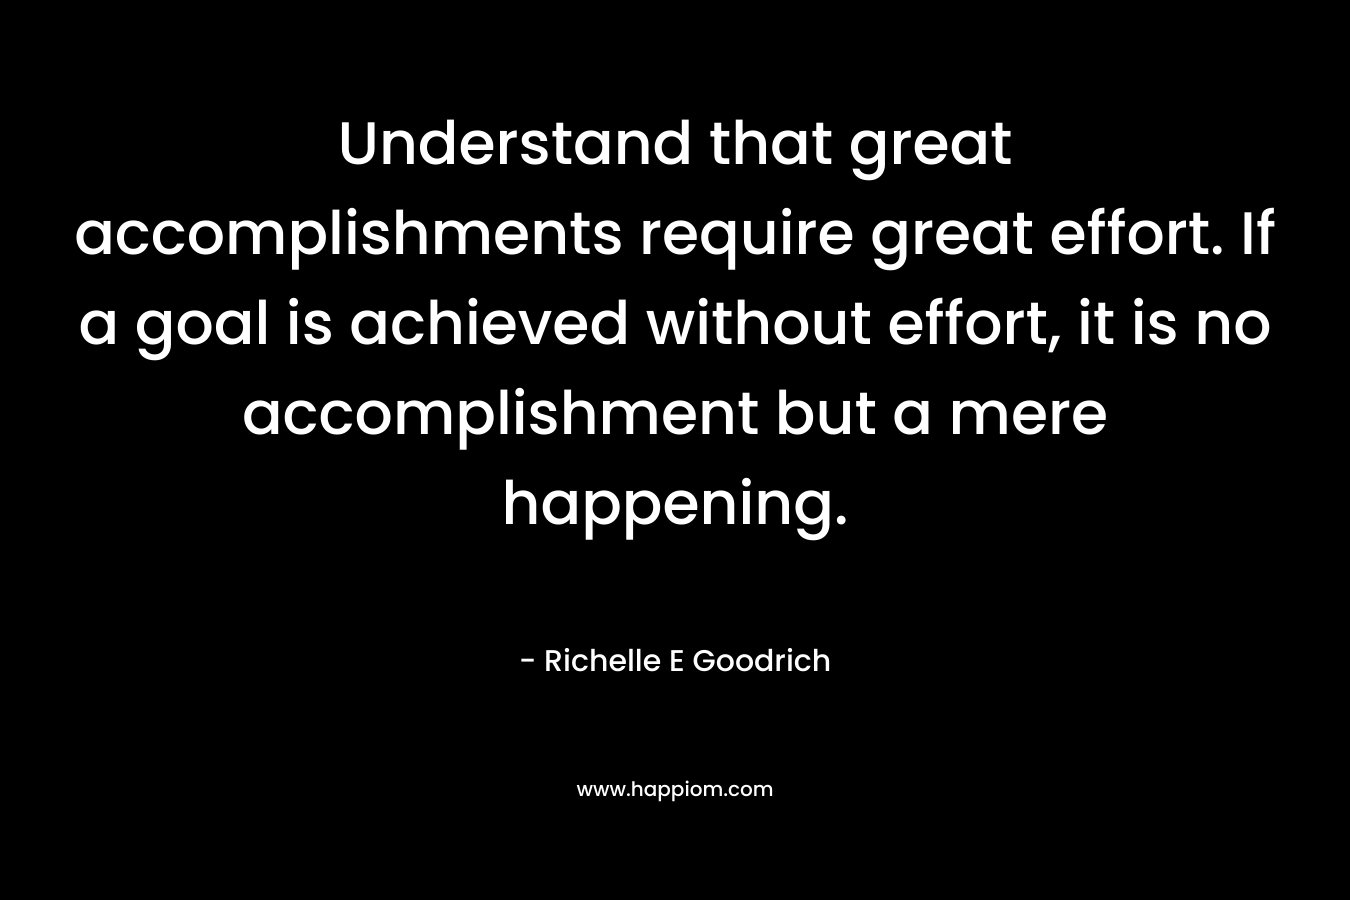 Understand that great accomplishments require great effort. If a goal is achieved without effort, it is no accomplishment but a mere happening.